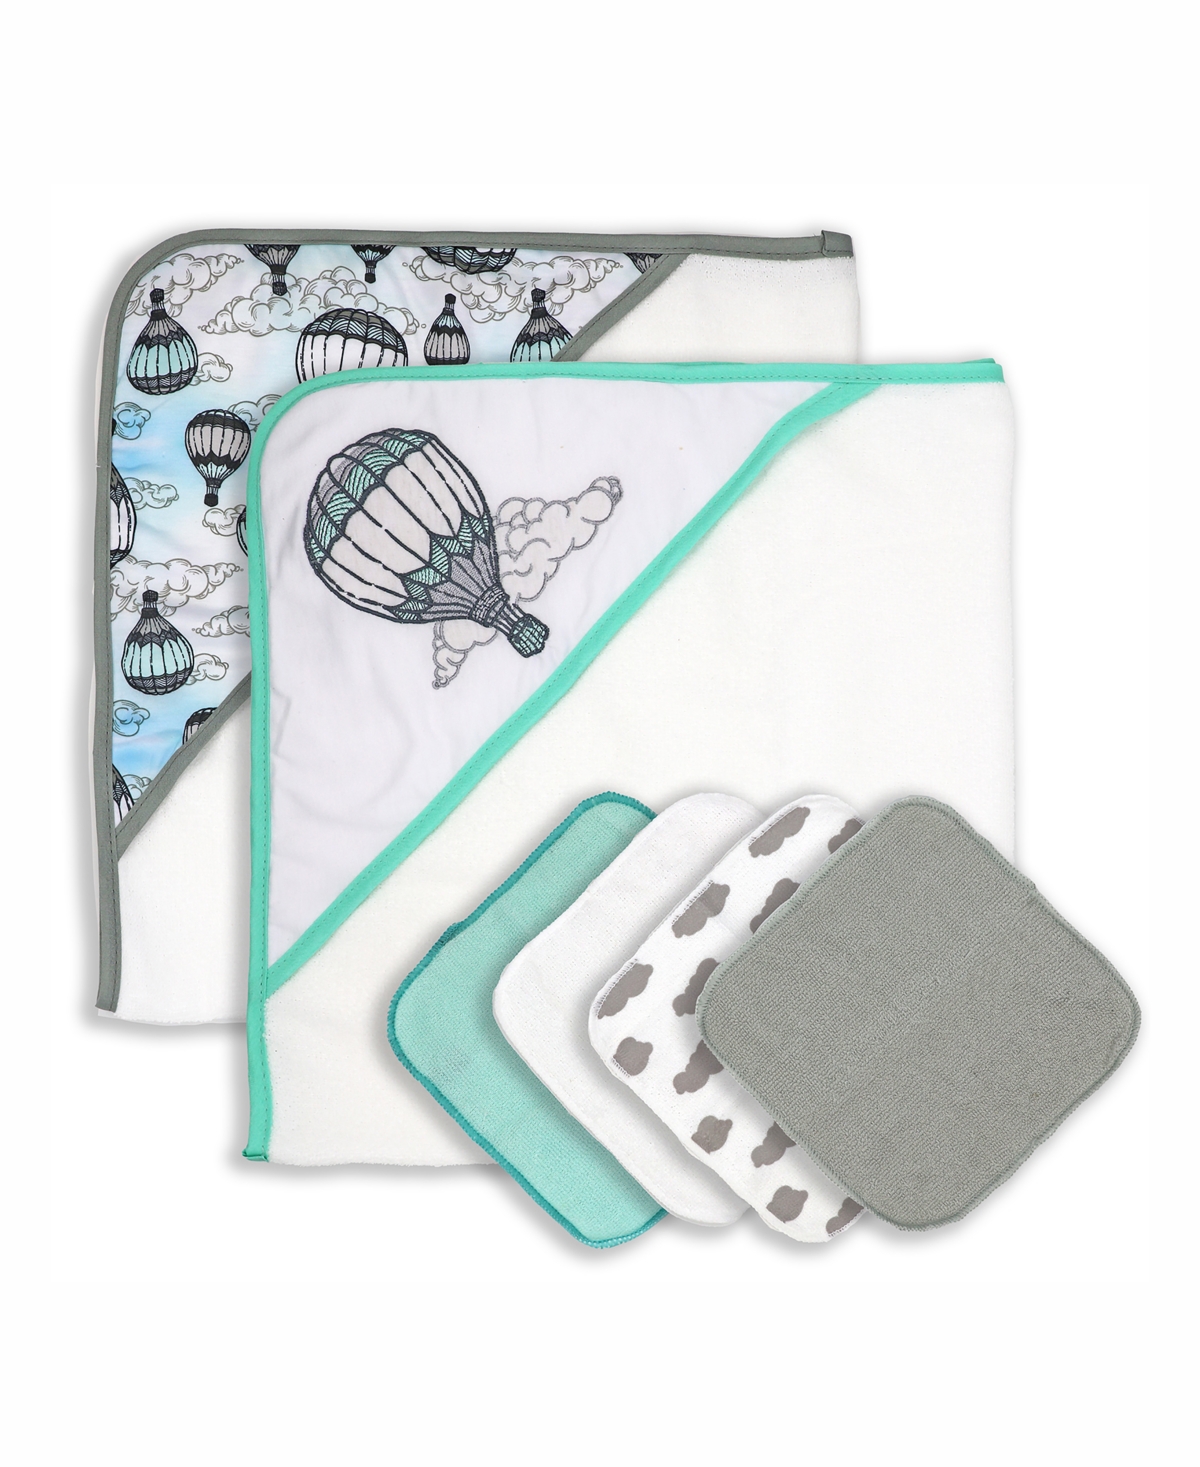 3 Stories Trading Baby Boys Or Baby Girls Hooded Towels And Washcloths, 6 Piece Set In Sea Foam And White